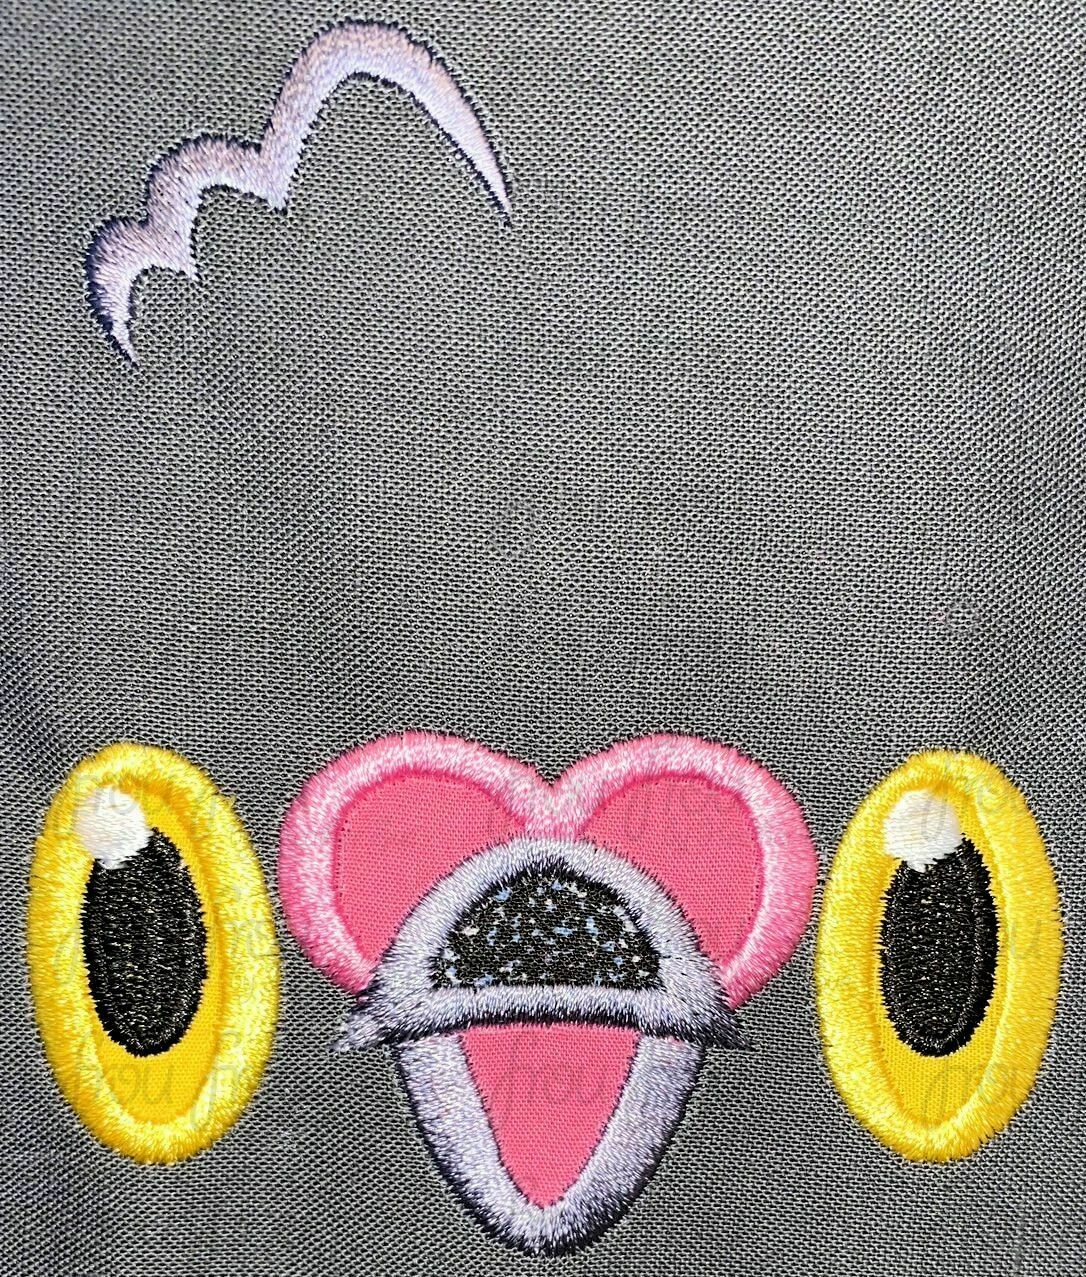 Pigeon Poke Man Just Face Machine Applique and filled Embroidery Design 2"-16"